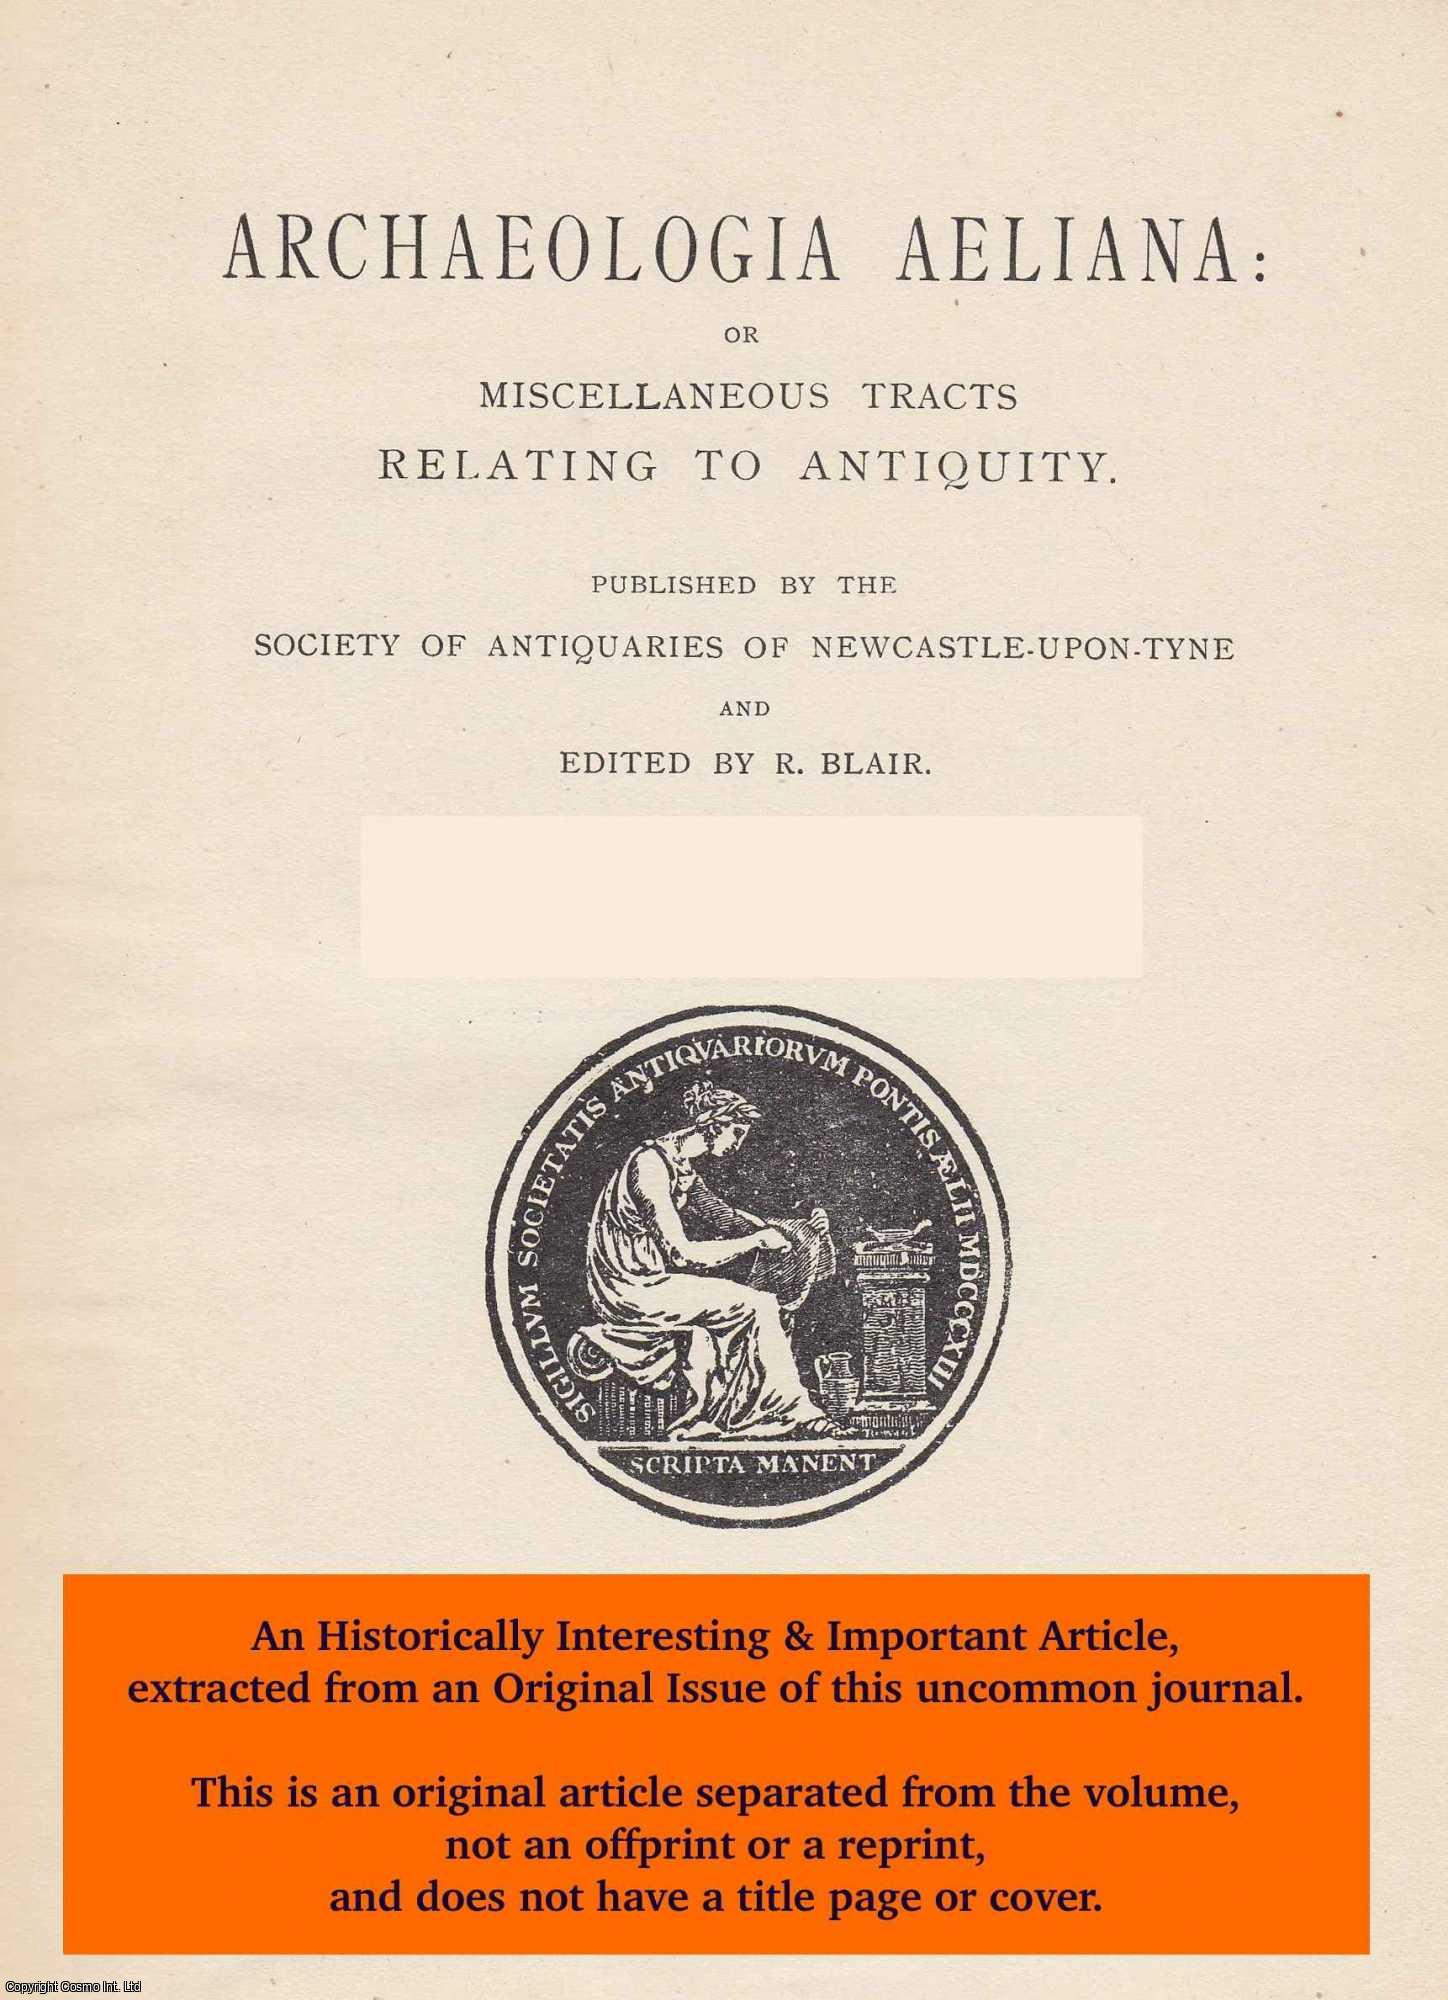 T. L. Jones, T. L. - Melkridge Bastle, Northumberland. An original article from The Archaeologia Aeliana: or Miscellaneous Tracts Relating to Antiquity, 1956.